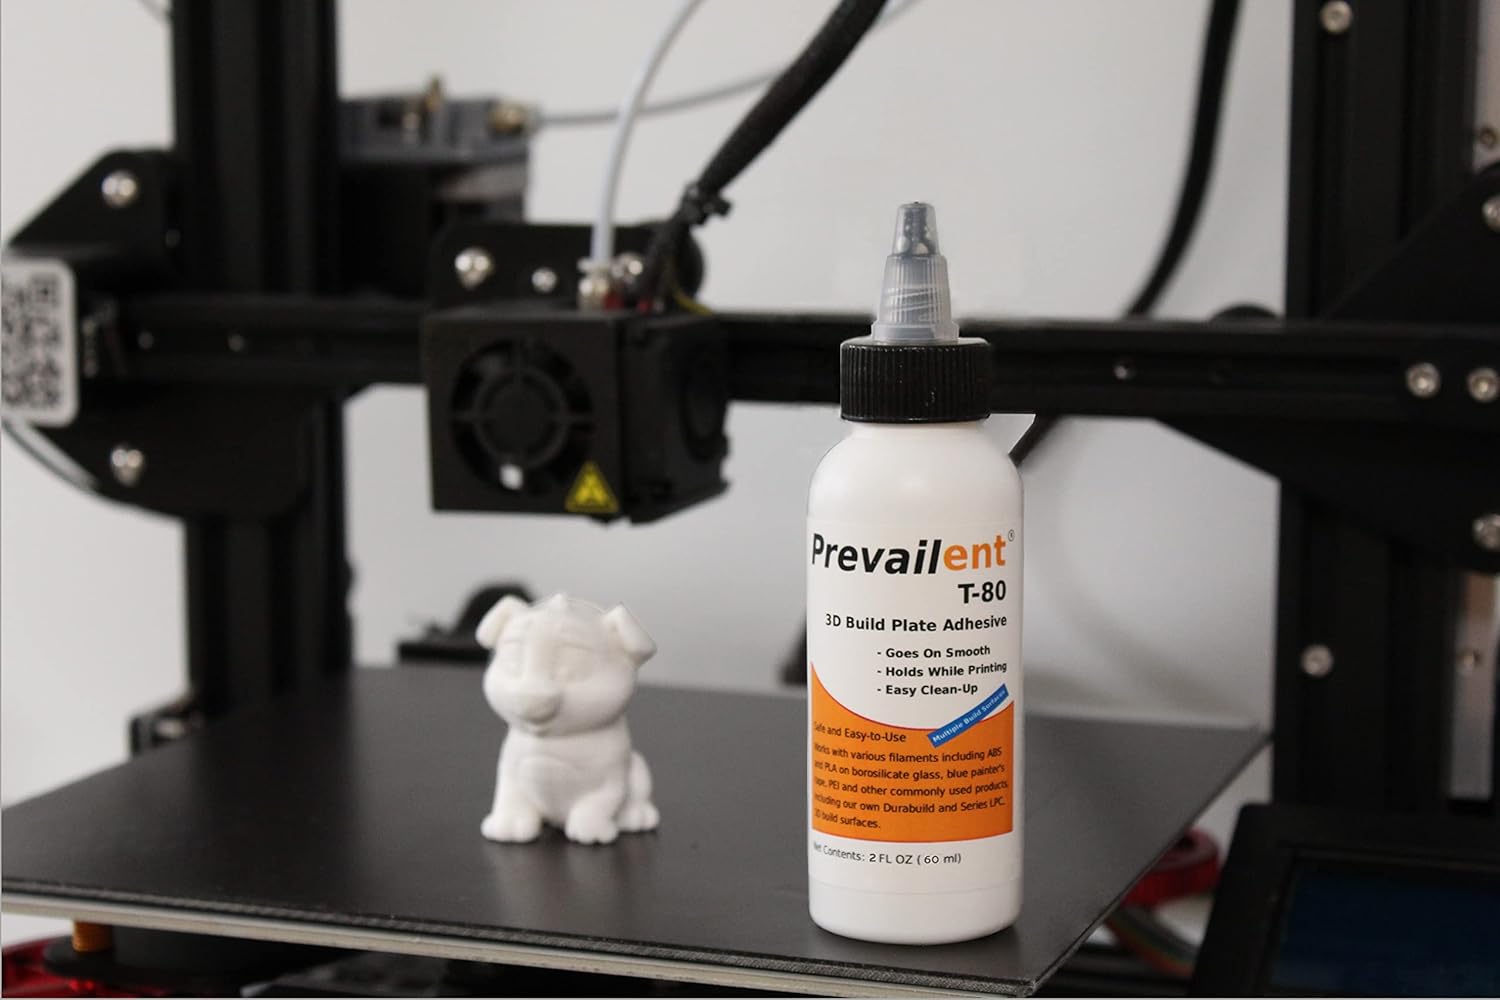 t-80-3d-printer-bed-adhesive-glue-helps-prevent-warping-strong-hold-and-easy-release-with-various-build-plates-and-filam-4 T-80 3D Printer Bed Adhesive Glue Review